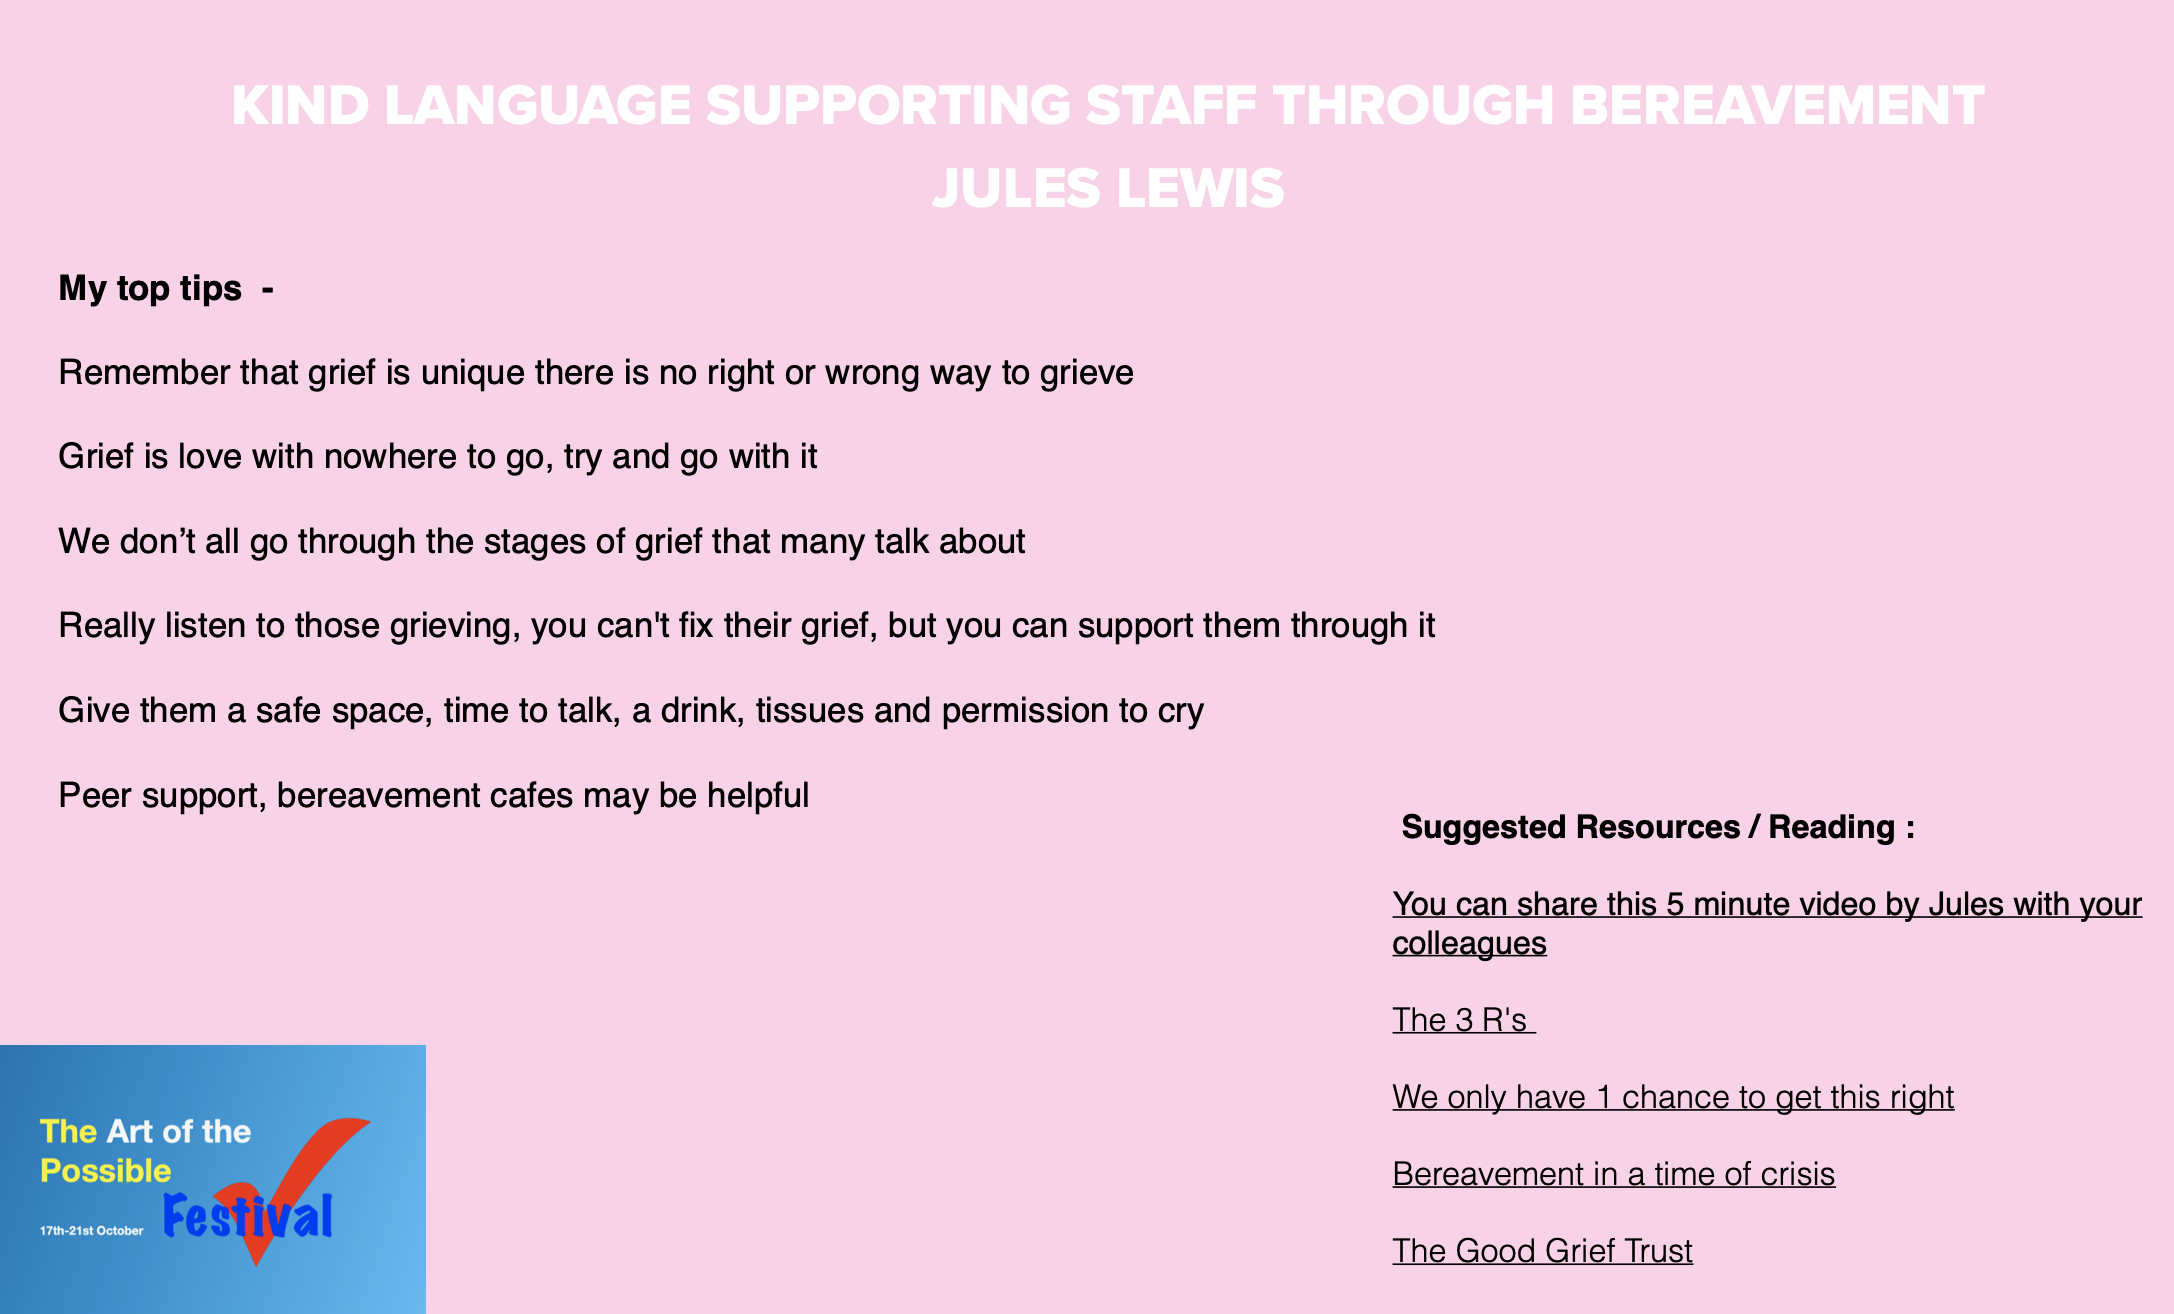 Kind Language and Supporting Staff through Bereavement featured image